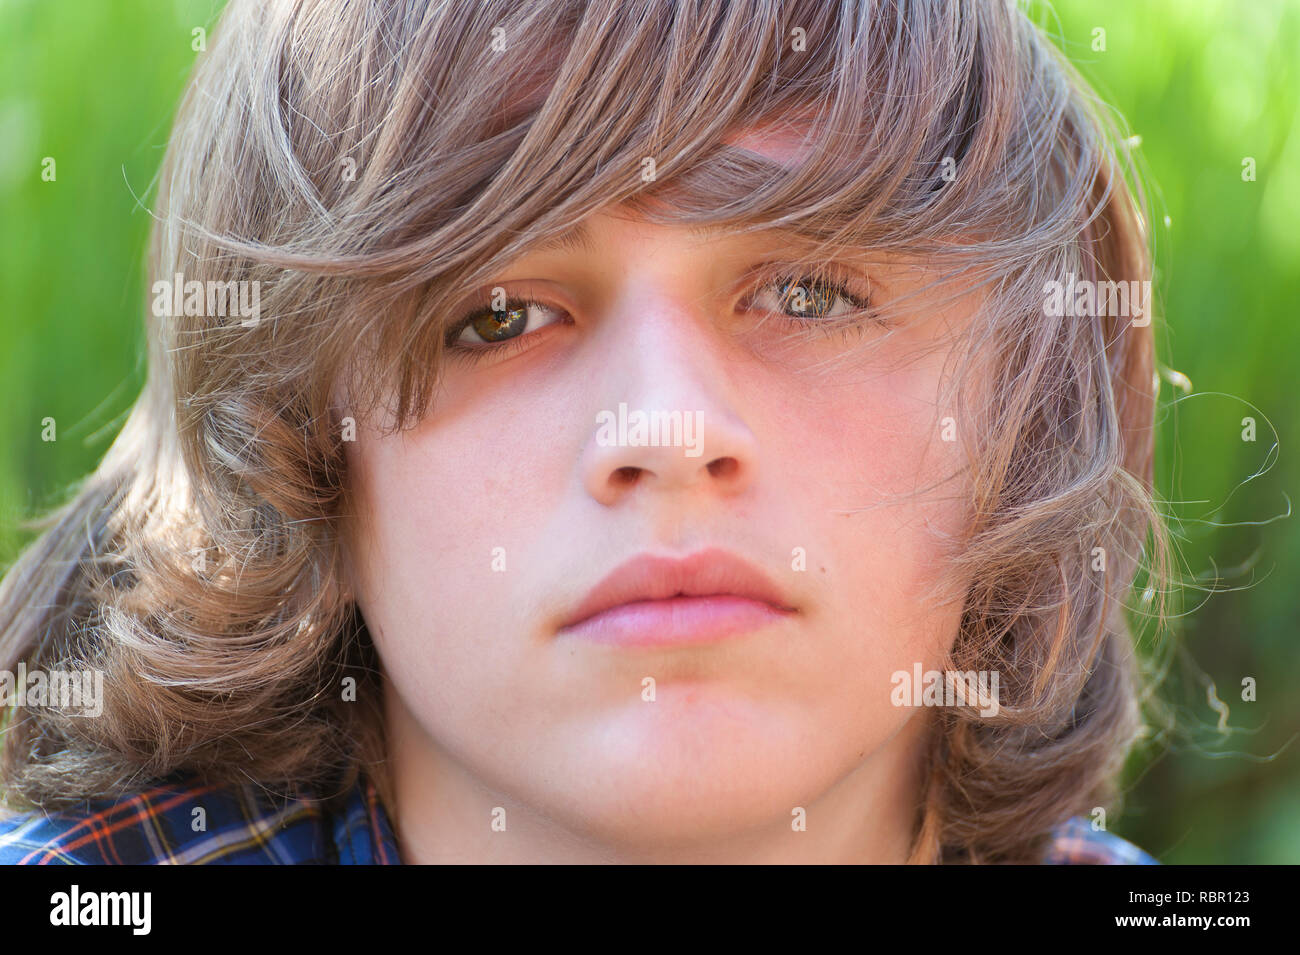 A close up portrait of a youg boy with long hair looking at camera. Stock Photo